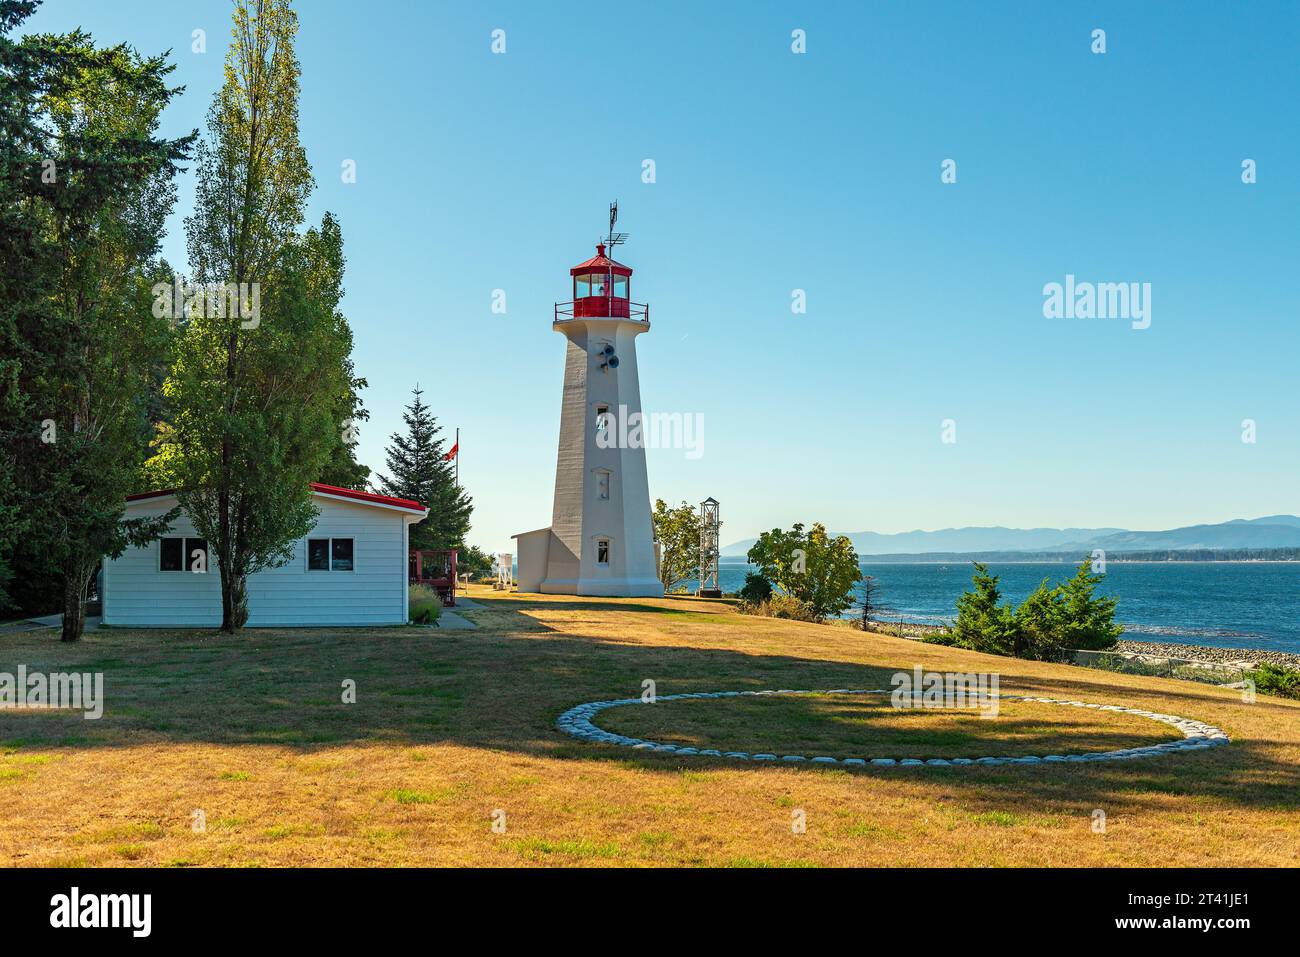 Cape Mudge town lighthouse by the Discovery Passage, Quadra Island, British Columbia, Canada. Stock Photo